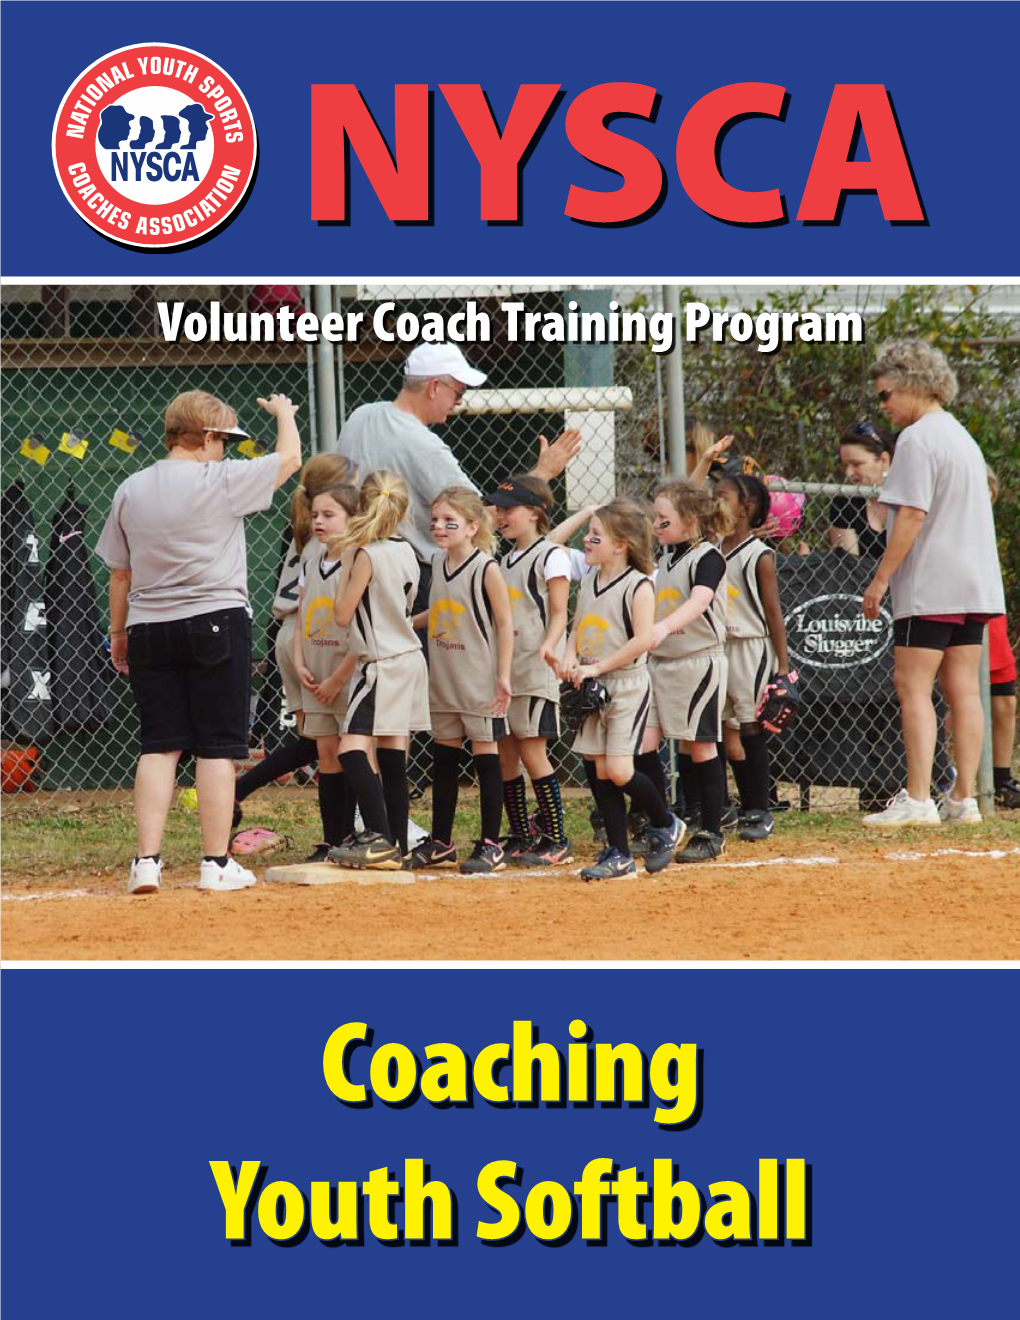 Coaching Youth Softball Ccooaacchhiinngg Yyoouutthh Ssooffttbbaallll